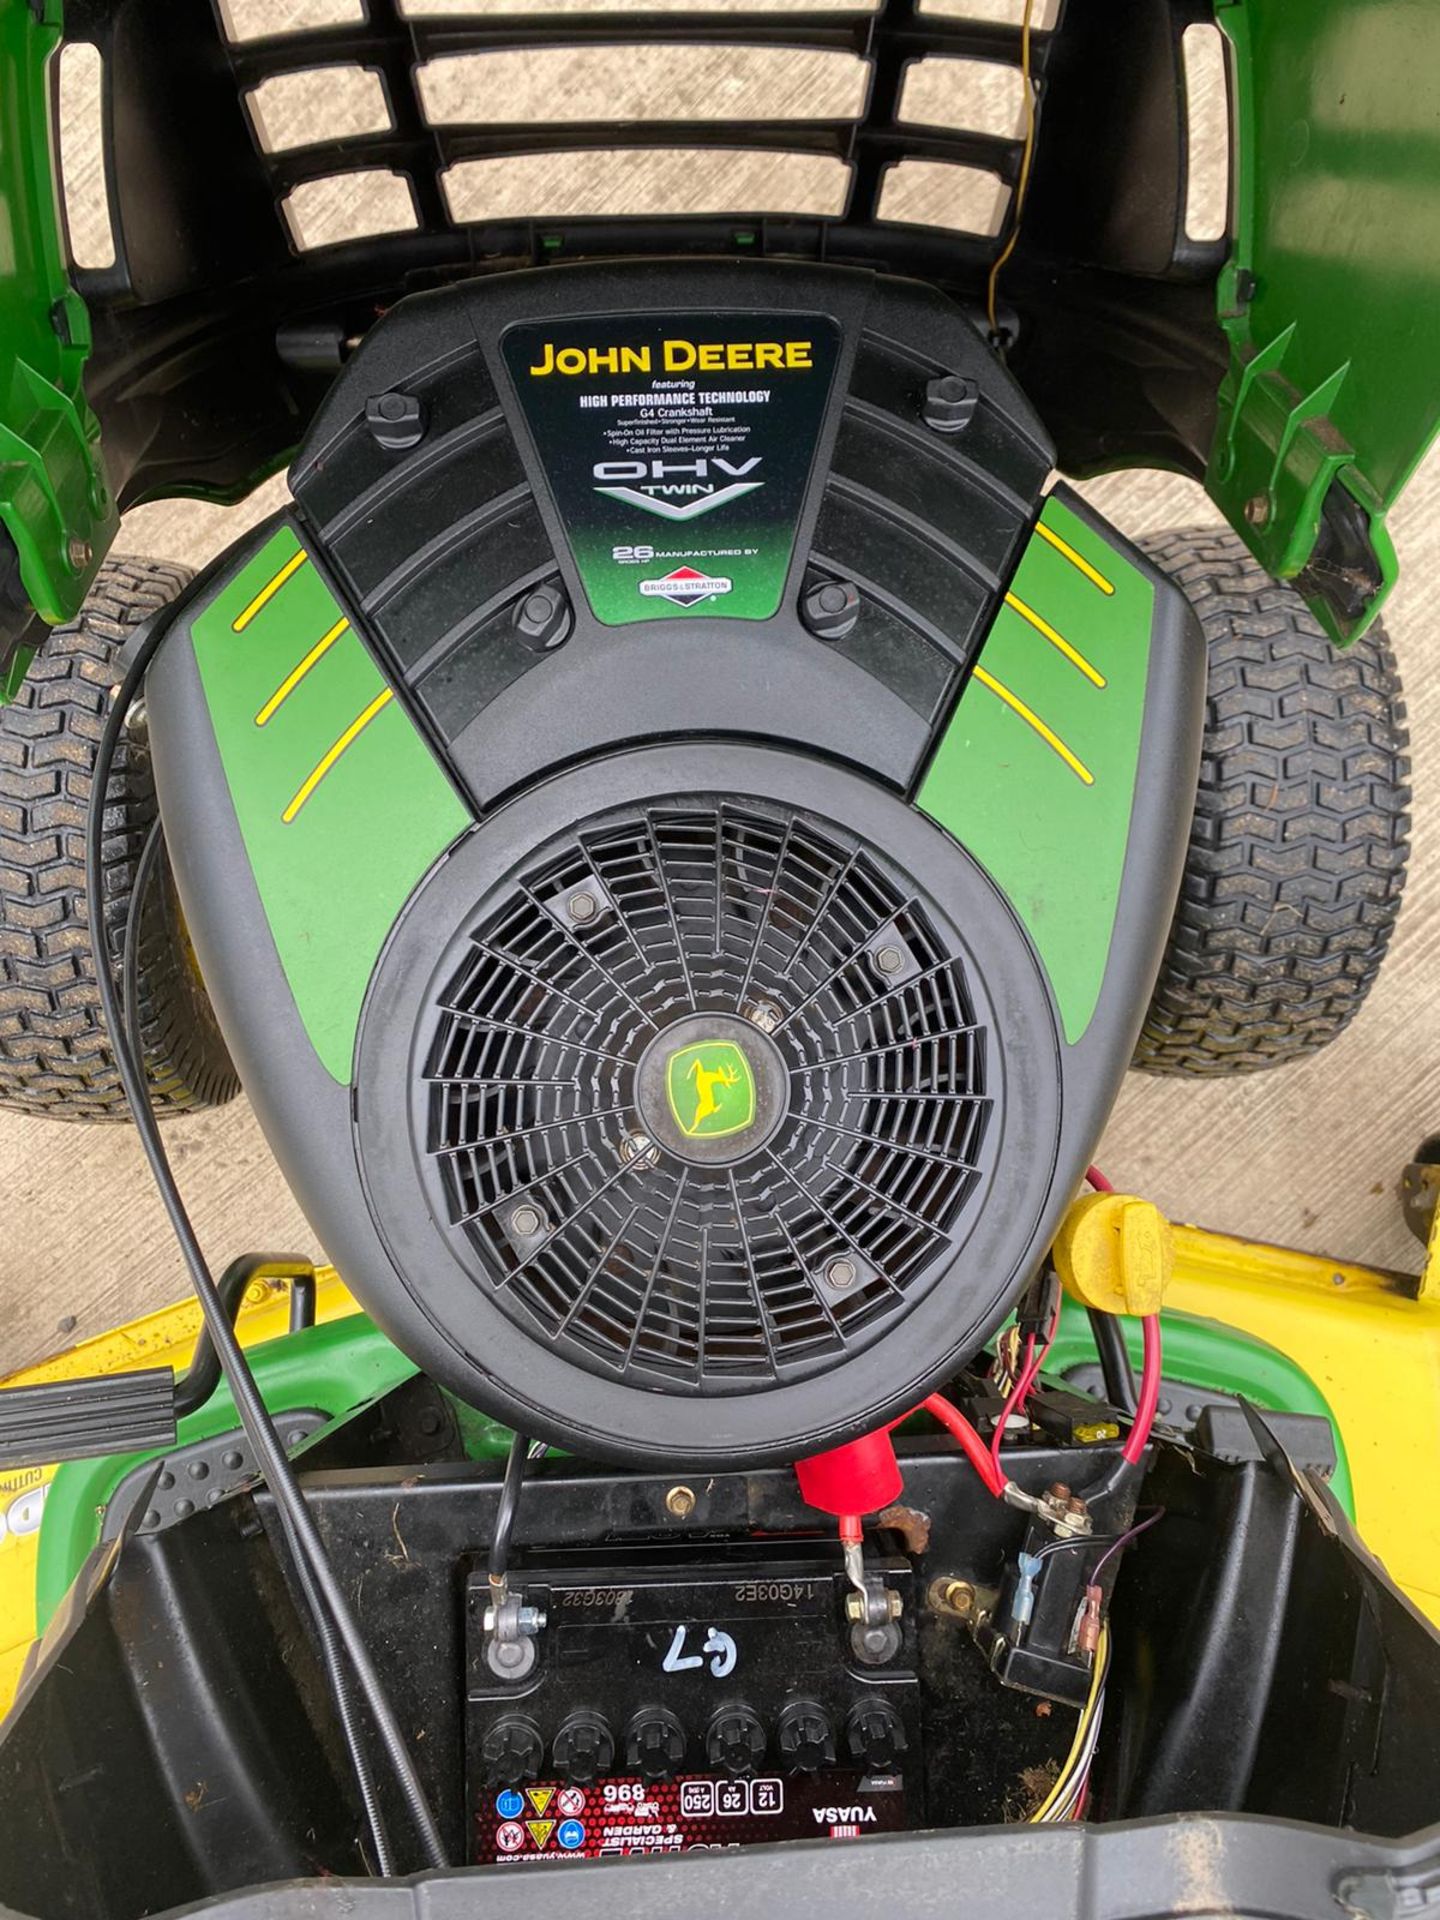 JOHN DEERE LA150 RIDE ON LAWN MOWER, RUNS AND WORKS WELL, 54 INCH CUTTING DECK *NO VAT* - Image 5 of 7